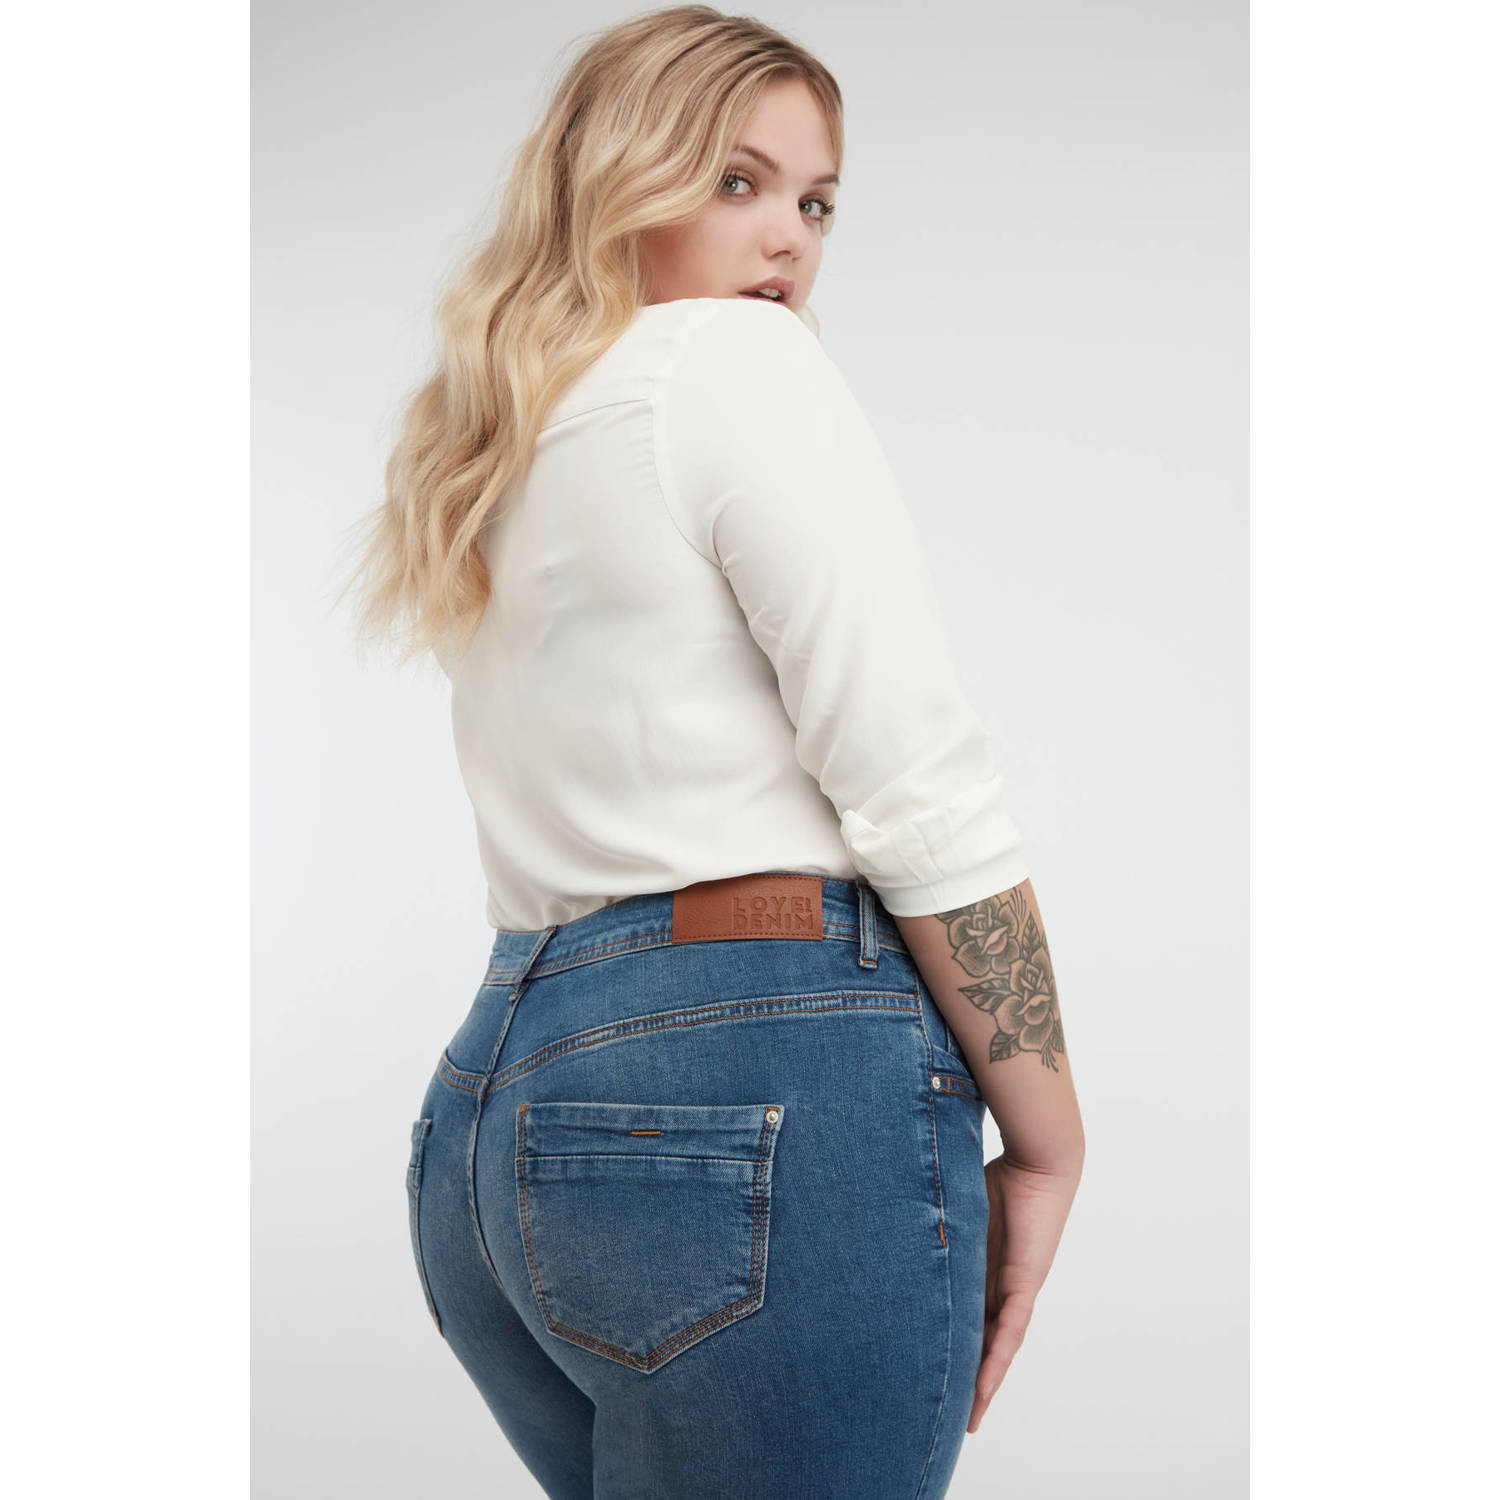 MS Mode straight fit jeans blauw